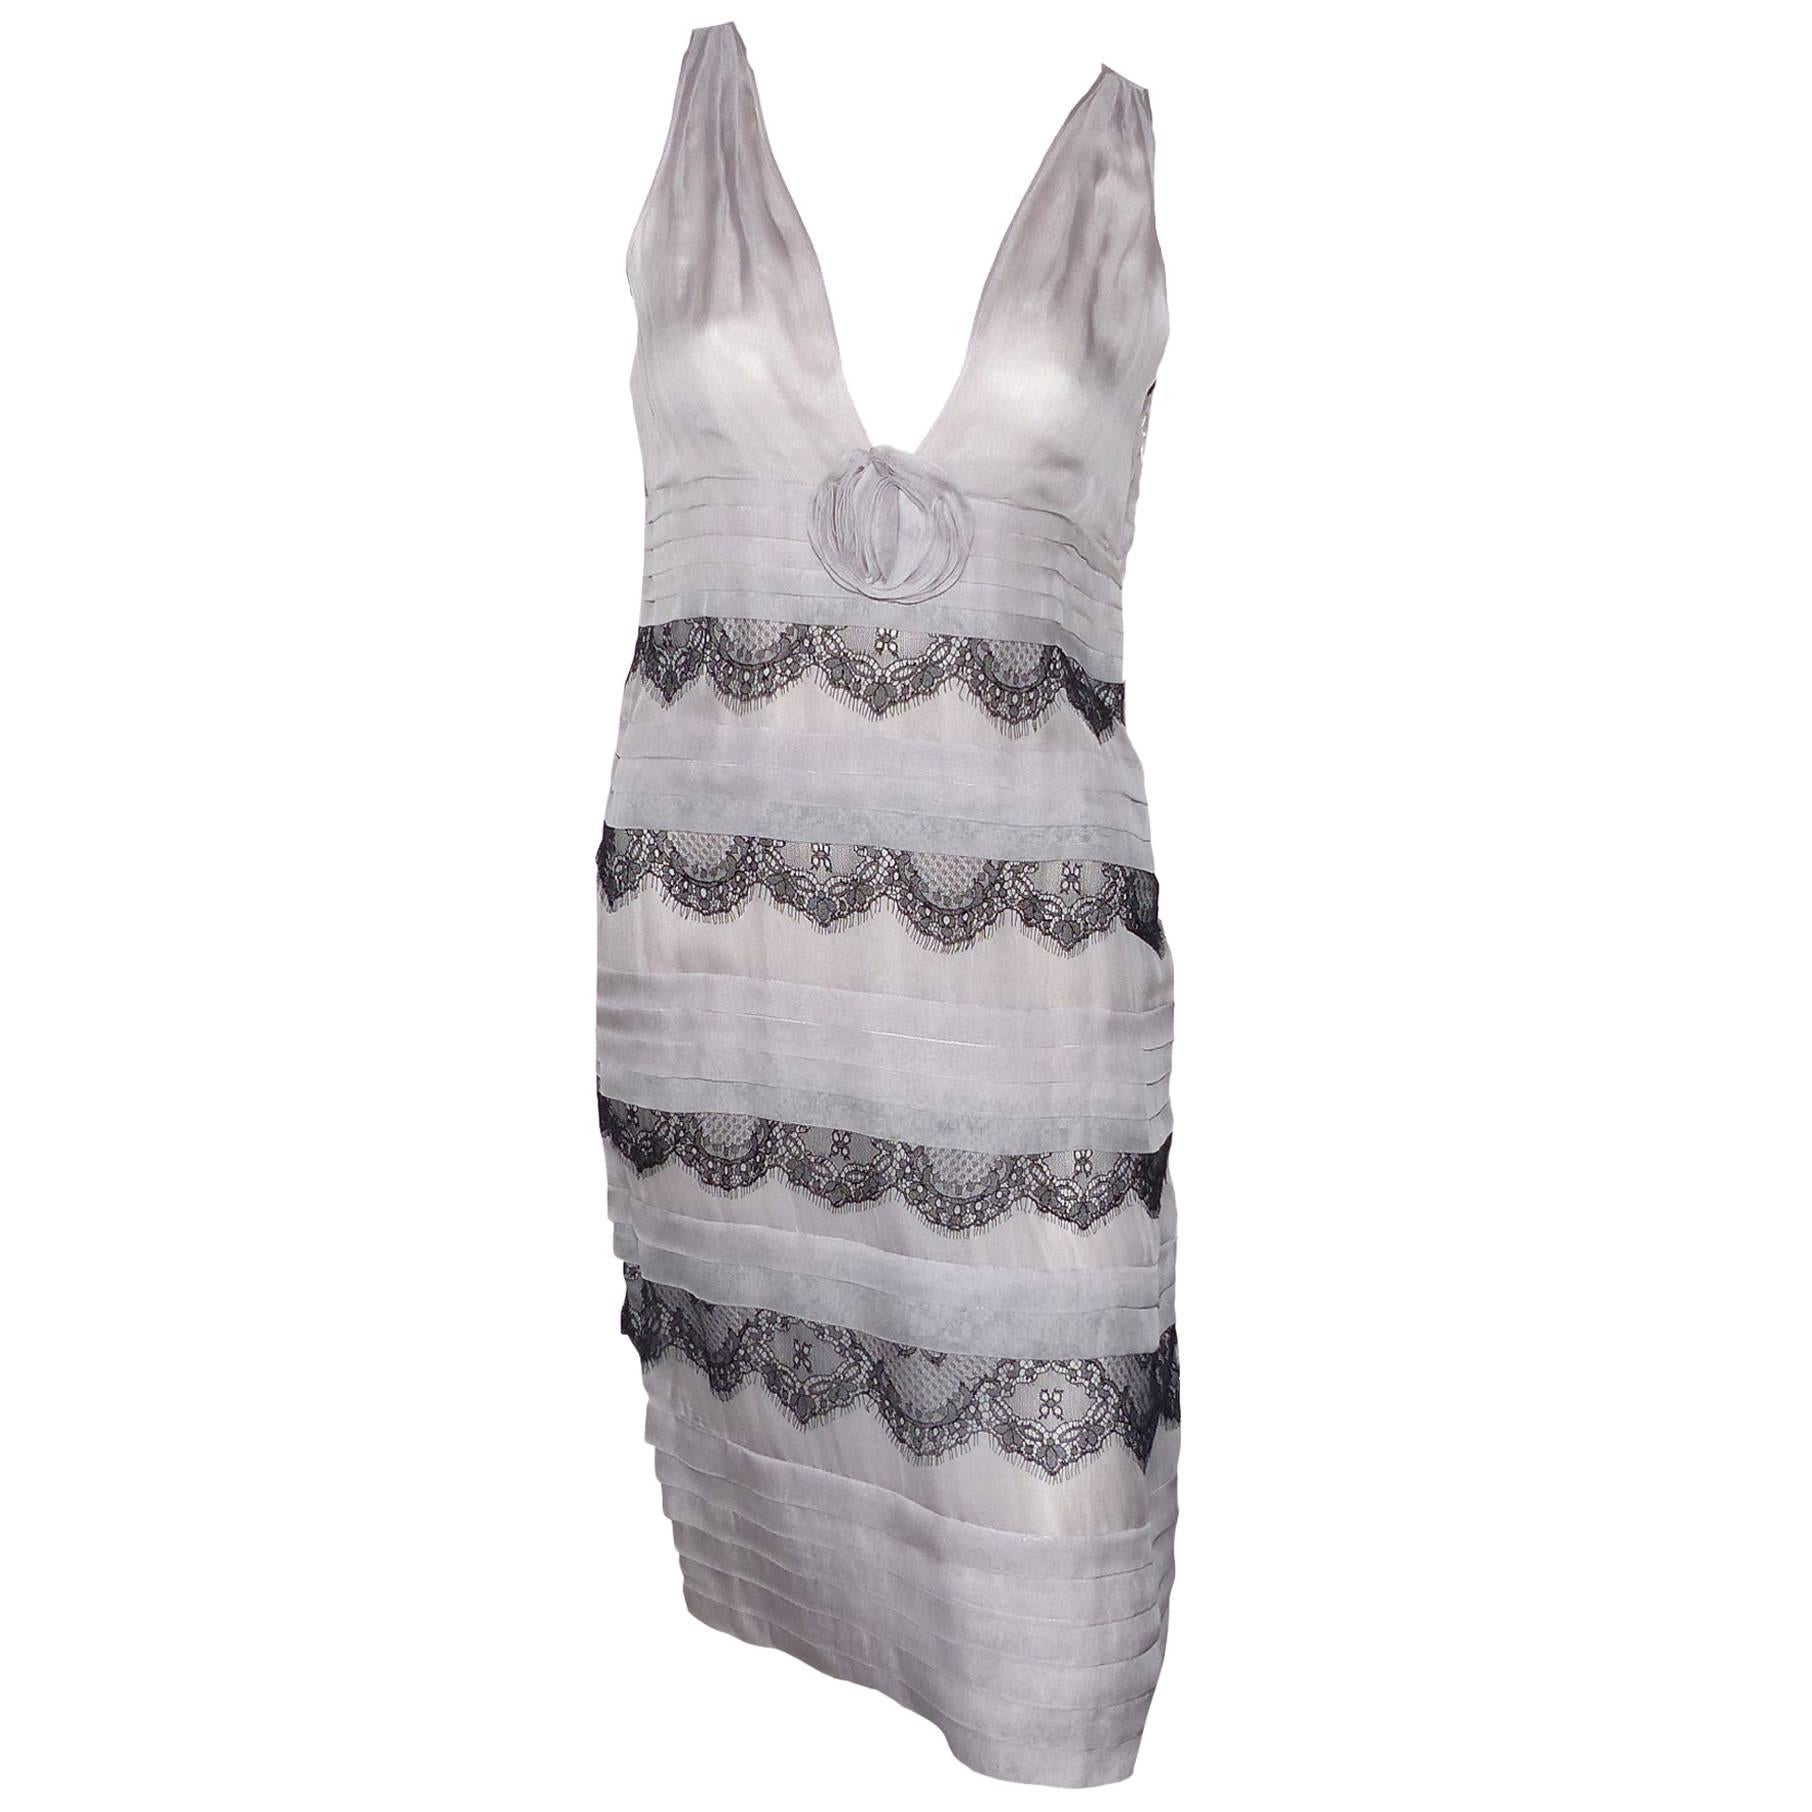 EFFET HAUTE COUTURE  Valentino Grey Silk Dress and  Black Lace  / SUBLIME 